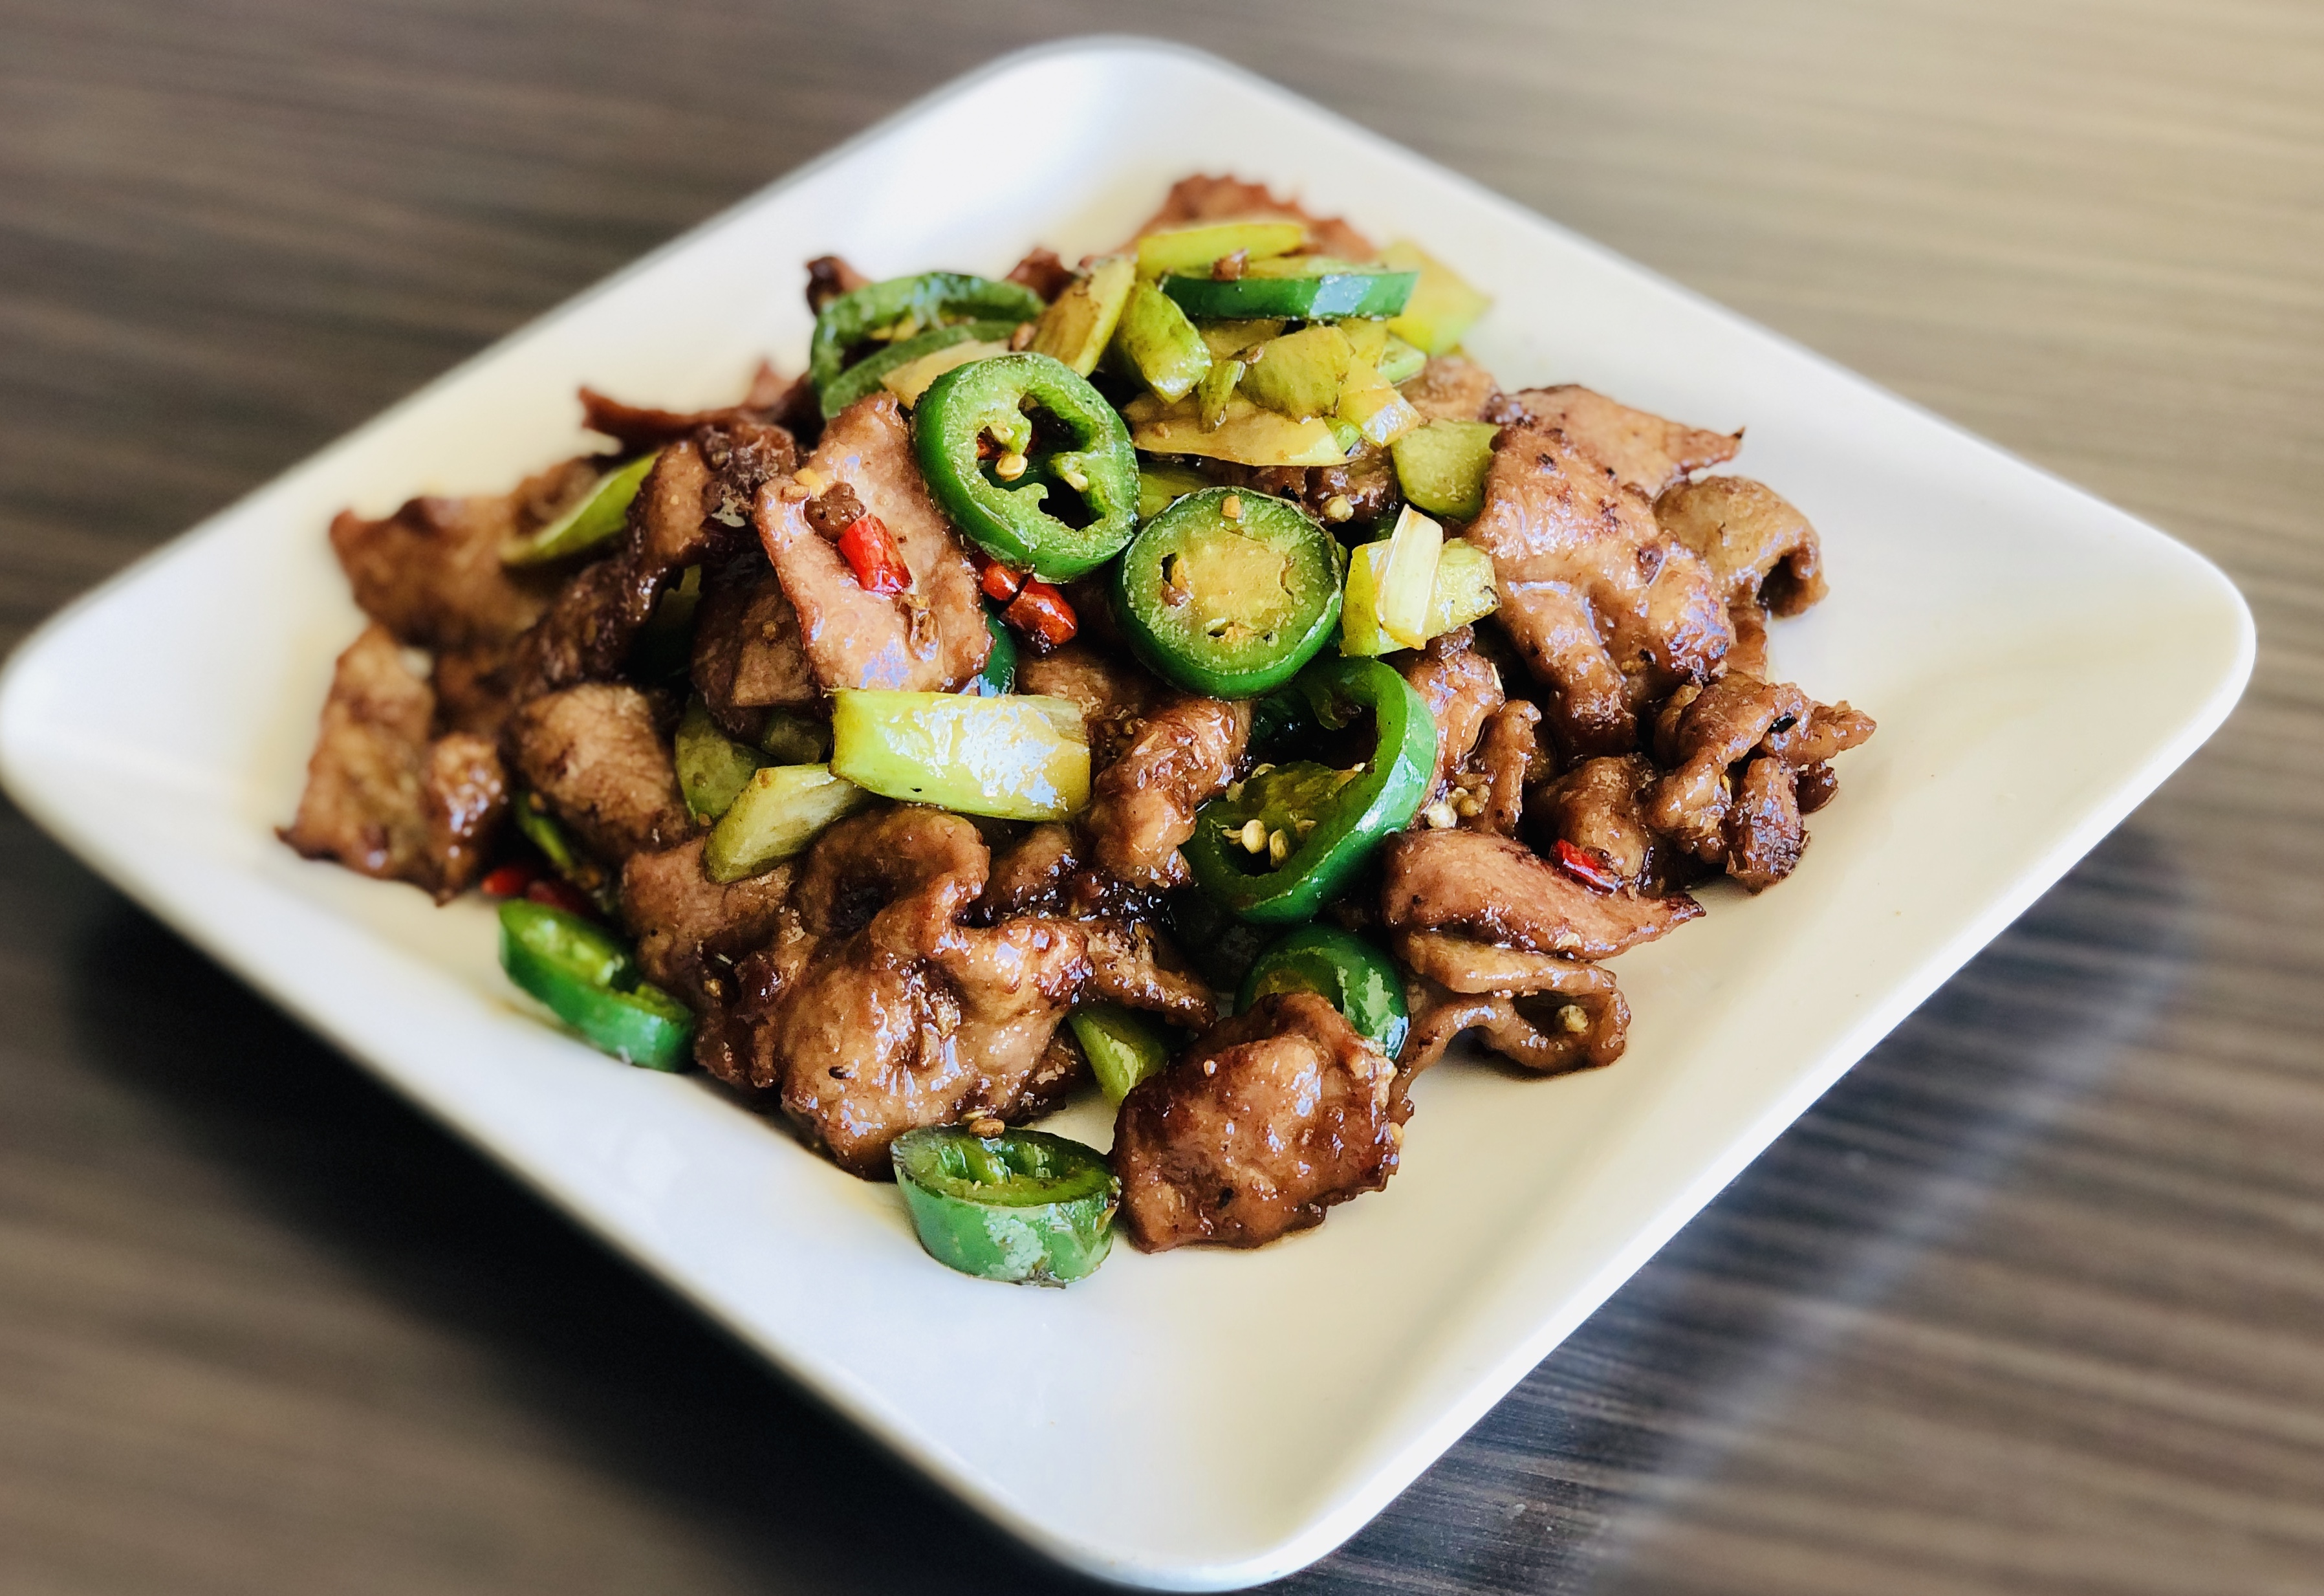 Stir Fried Beef with Pickled Chili 泡椒牛